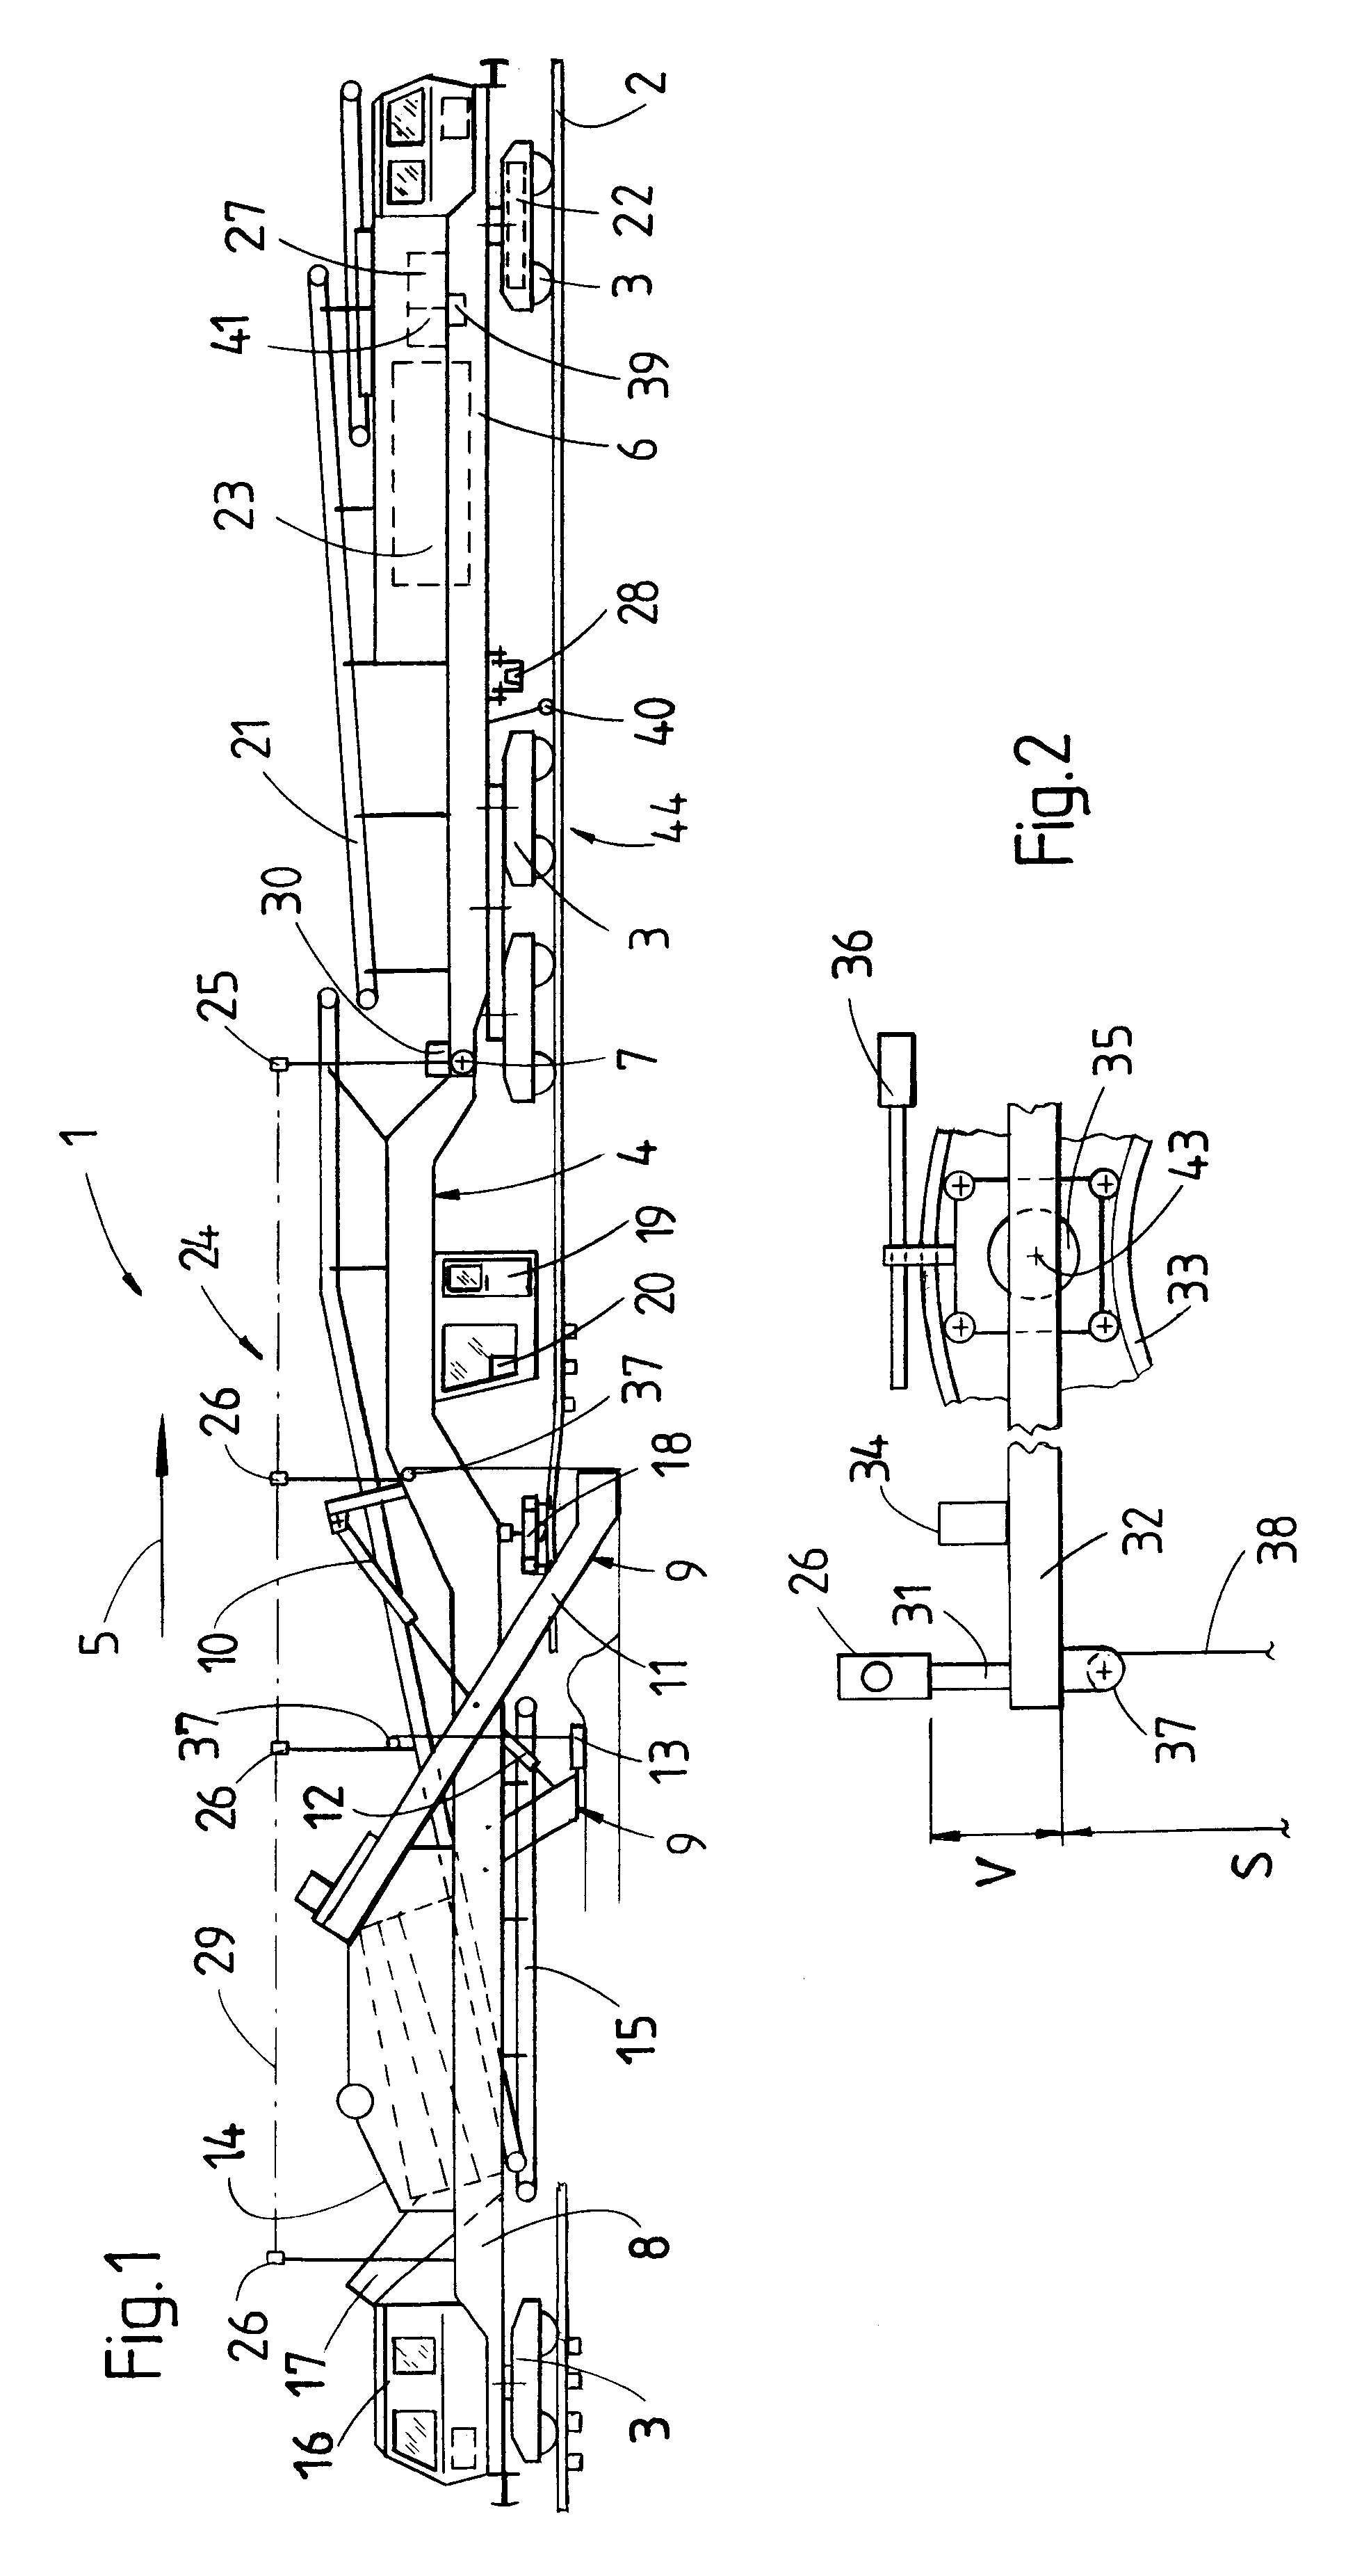 Machine and method for rehabilitating a ballast bed